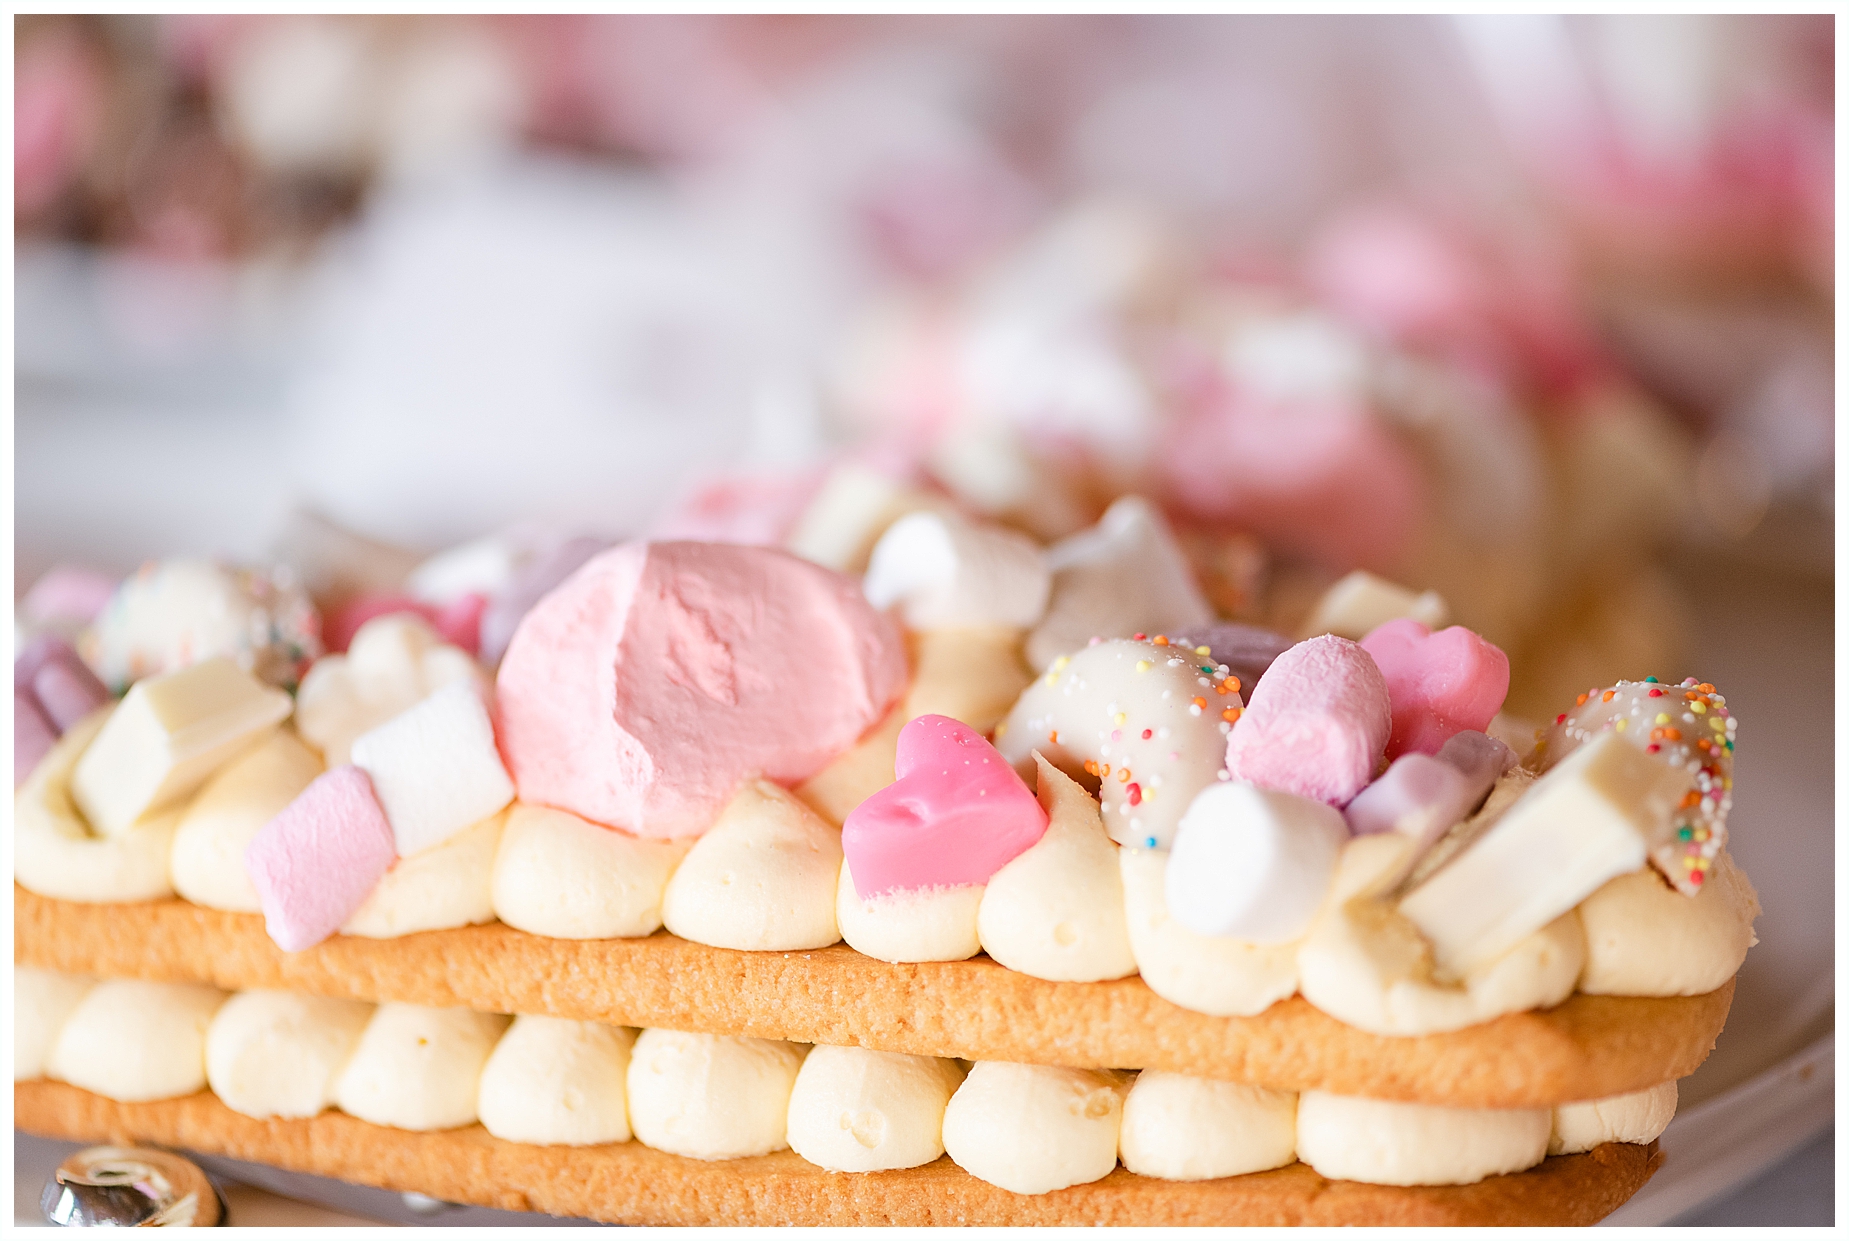 biscuit cake with meringue topping in pink shades